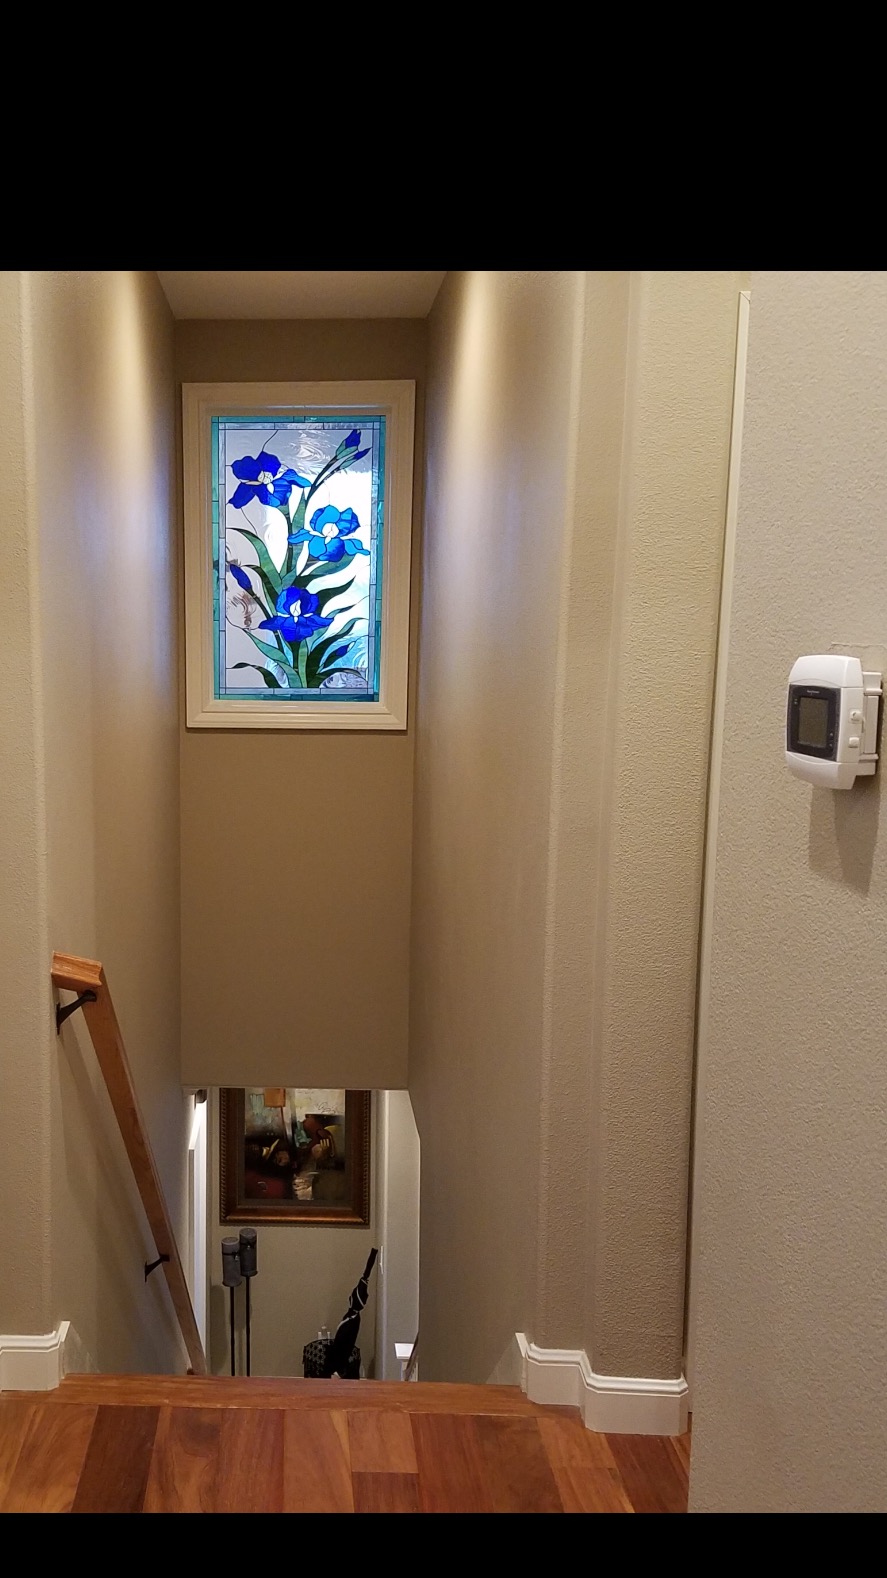 Lovely "iris trio" stained glass window installed over a stairway